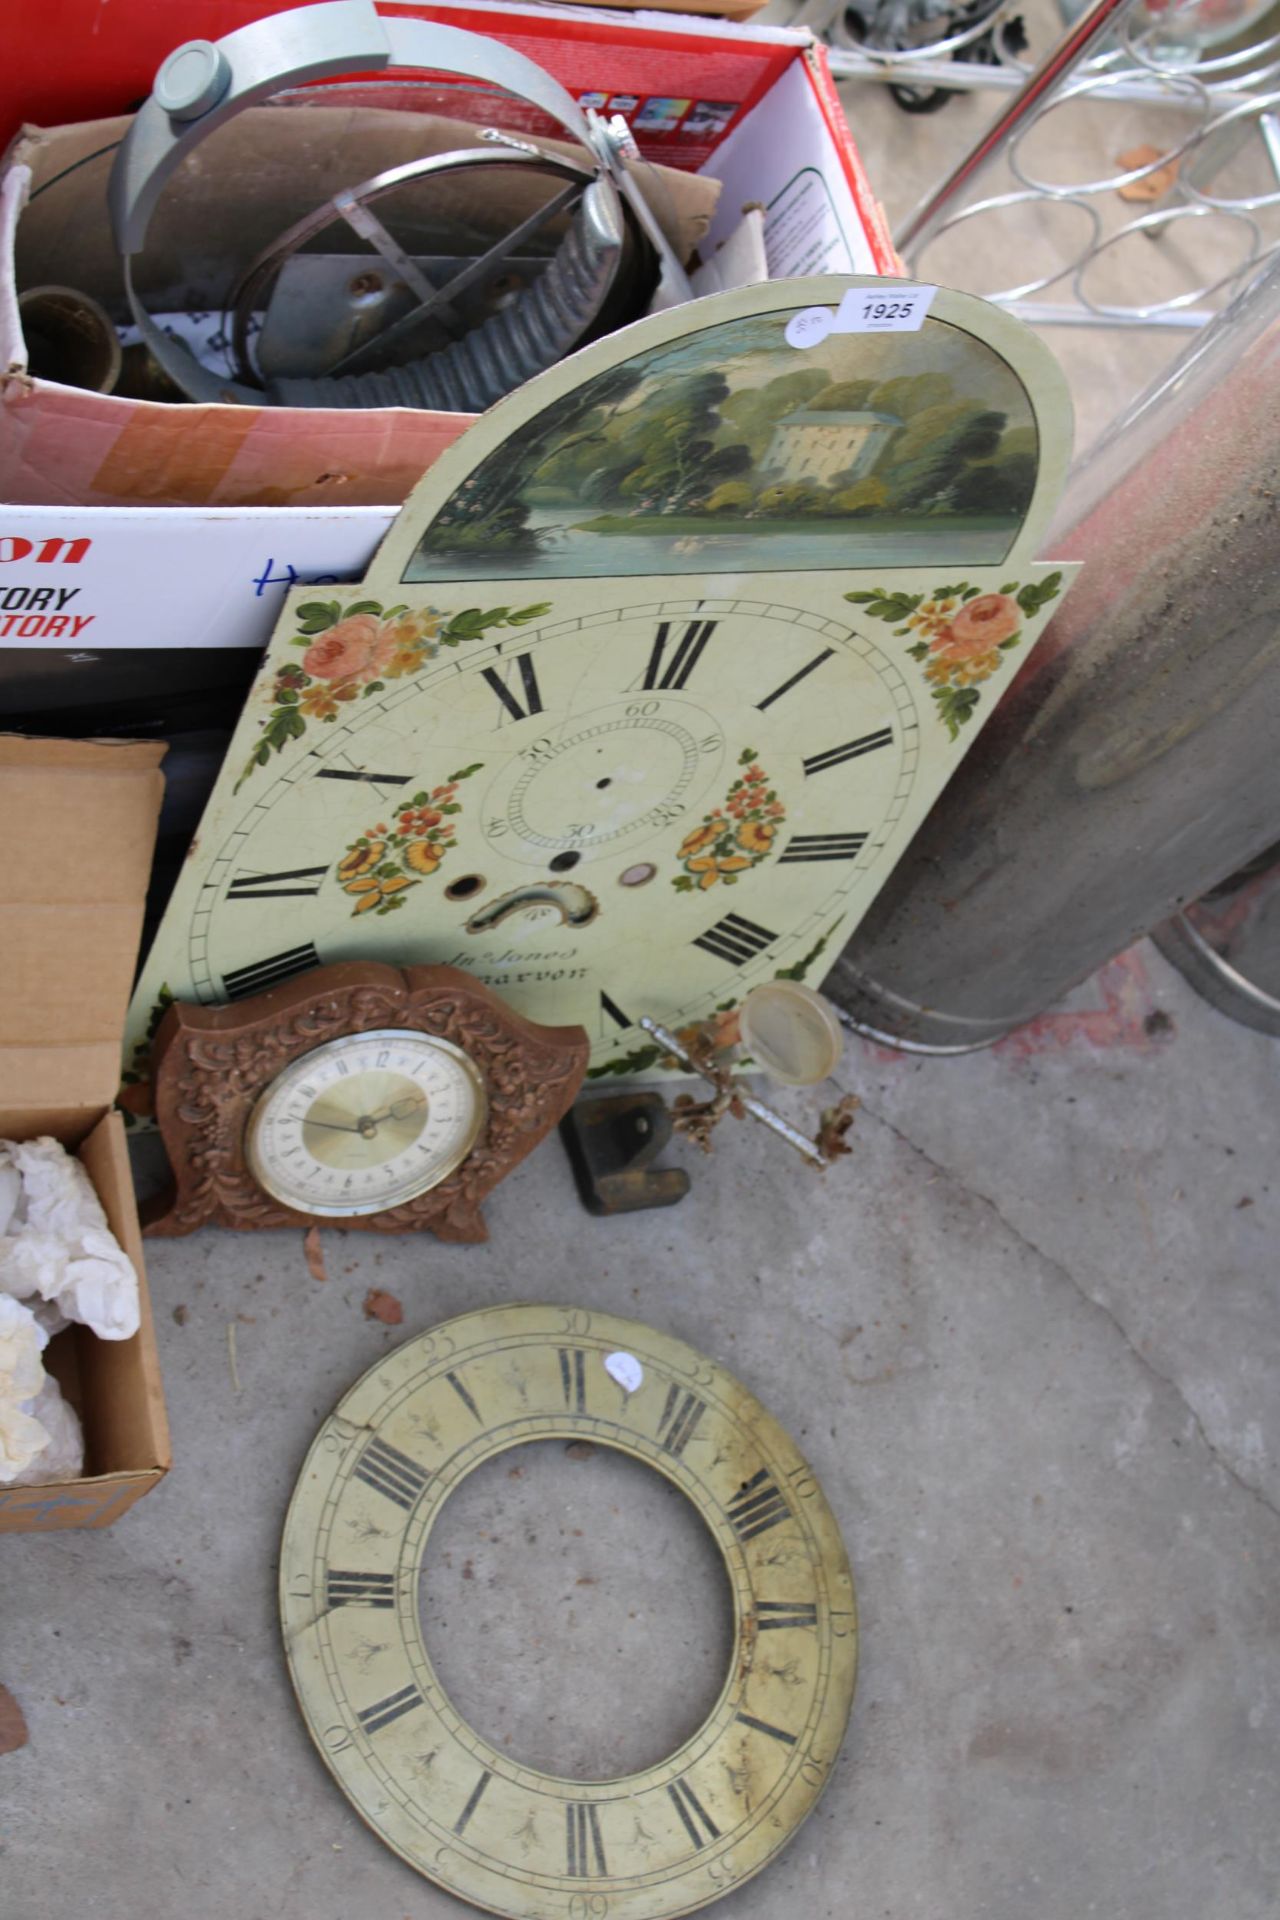 AN ASSORTMENT OF VINTAGE CLOCK PARTS TO INCLUDE FACES, COGS AND BOOKS ON CLOCKS ETC - Image 3 of 4